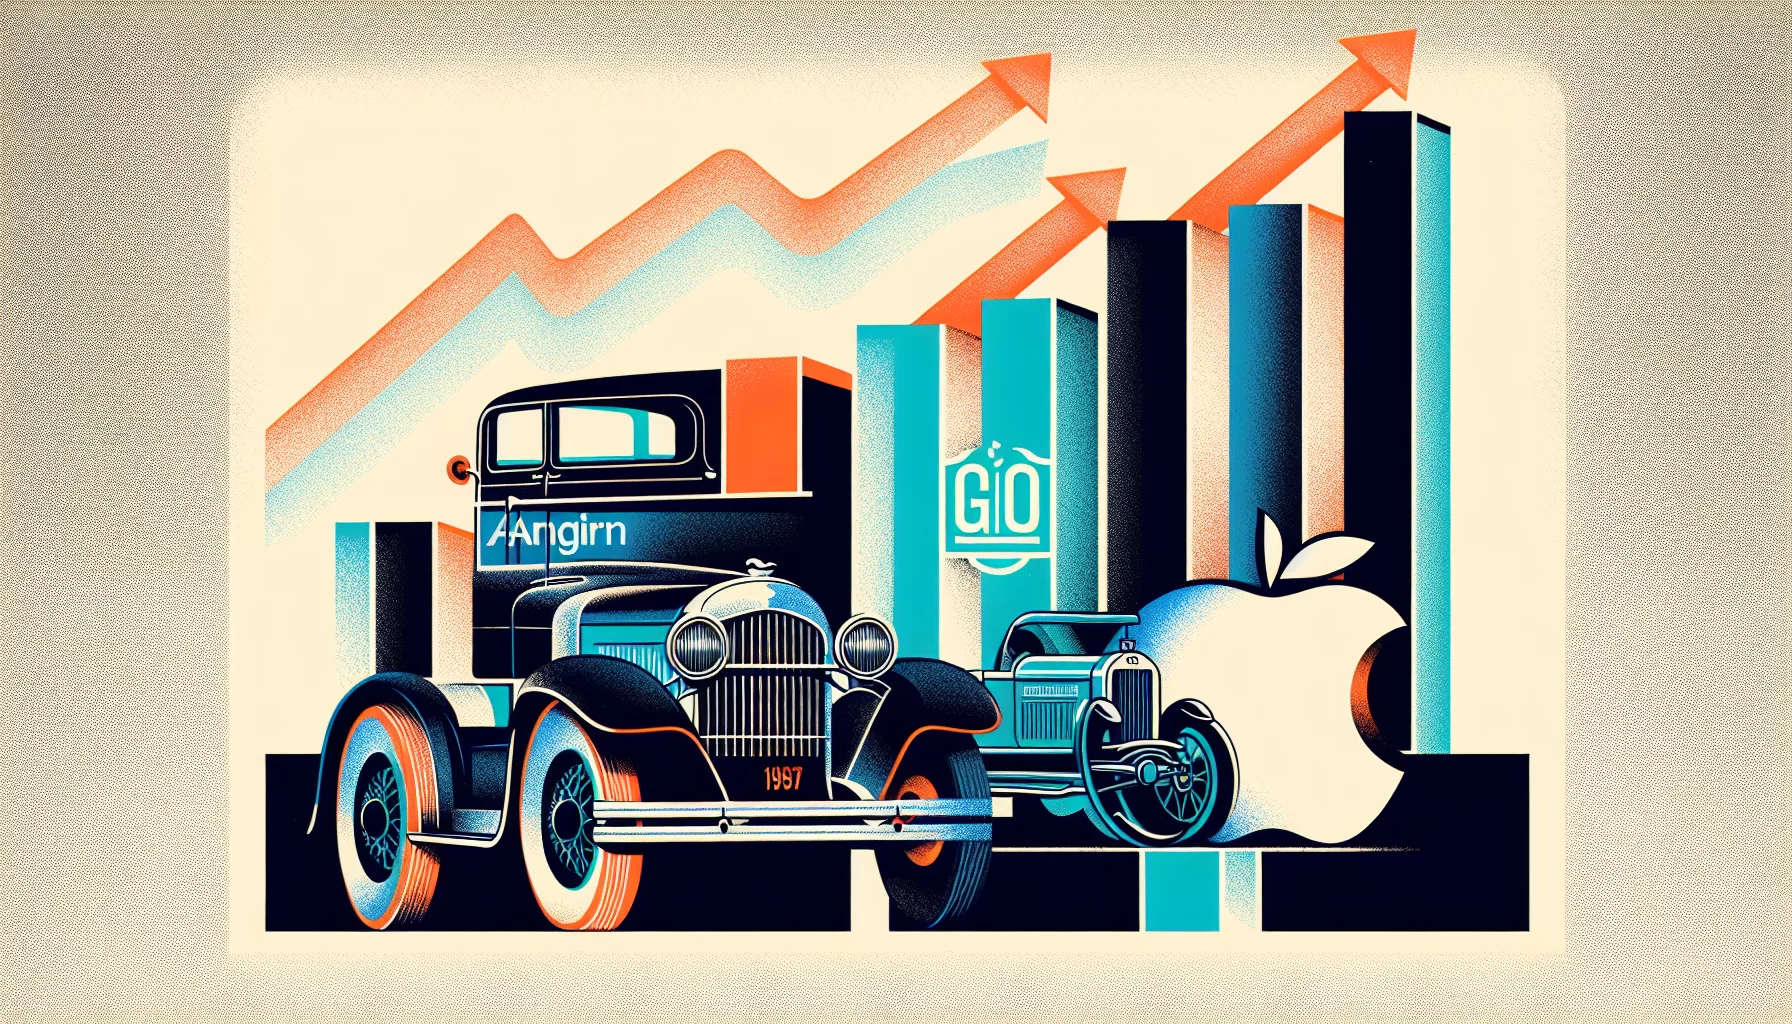 Tracking significant stock movements: Affirm, General motors, and Apple in focus